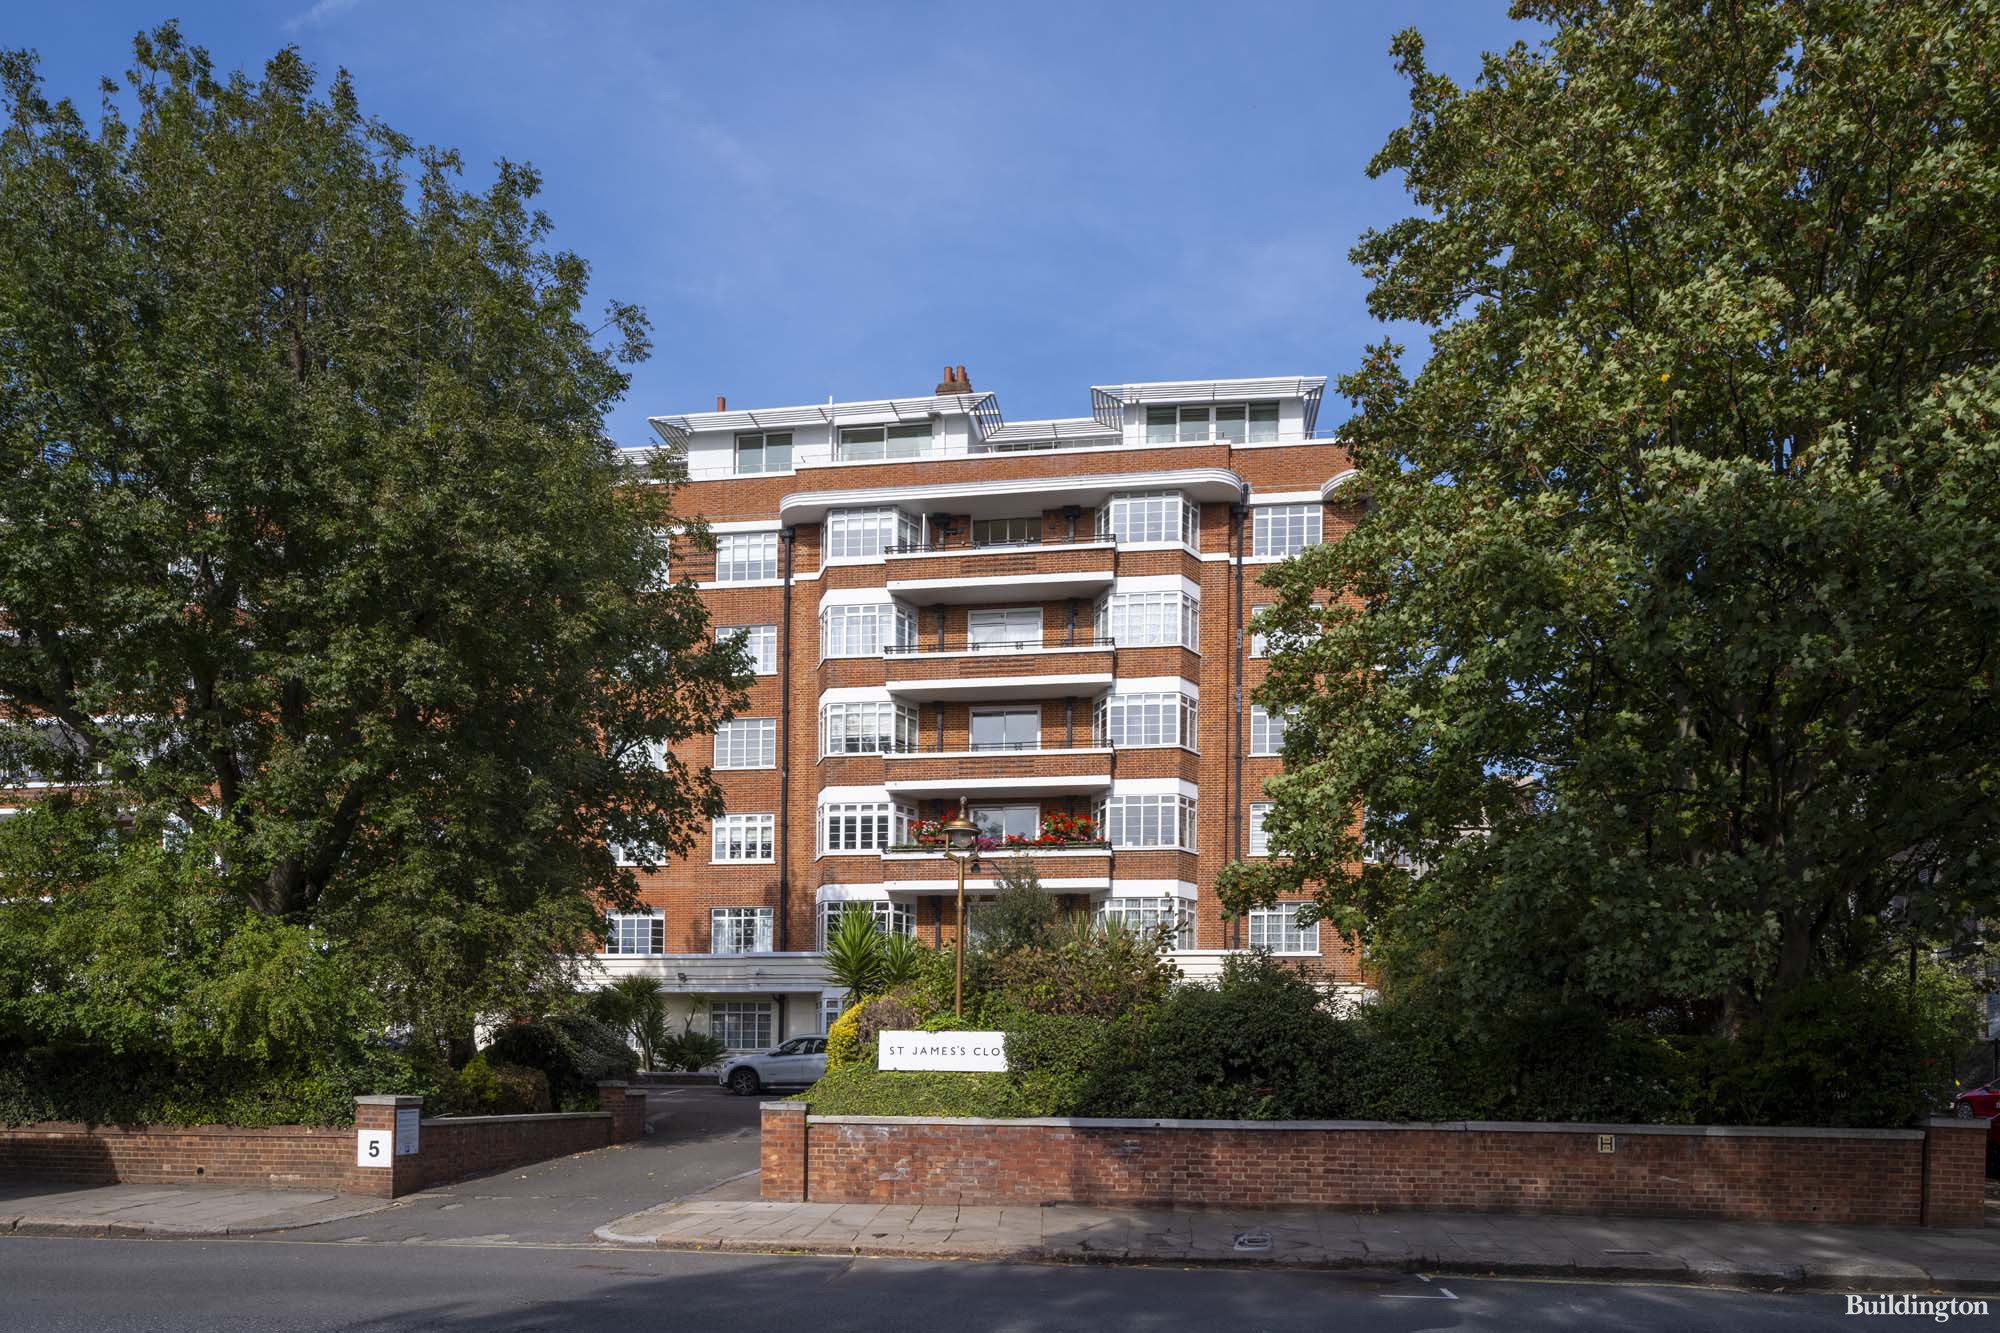 St James Close apartment building on Prince Albert Road in St John's Wood, London NW8